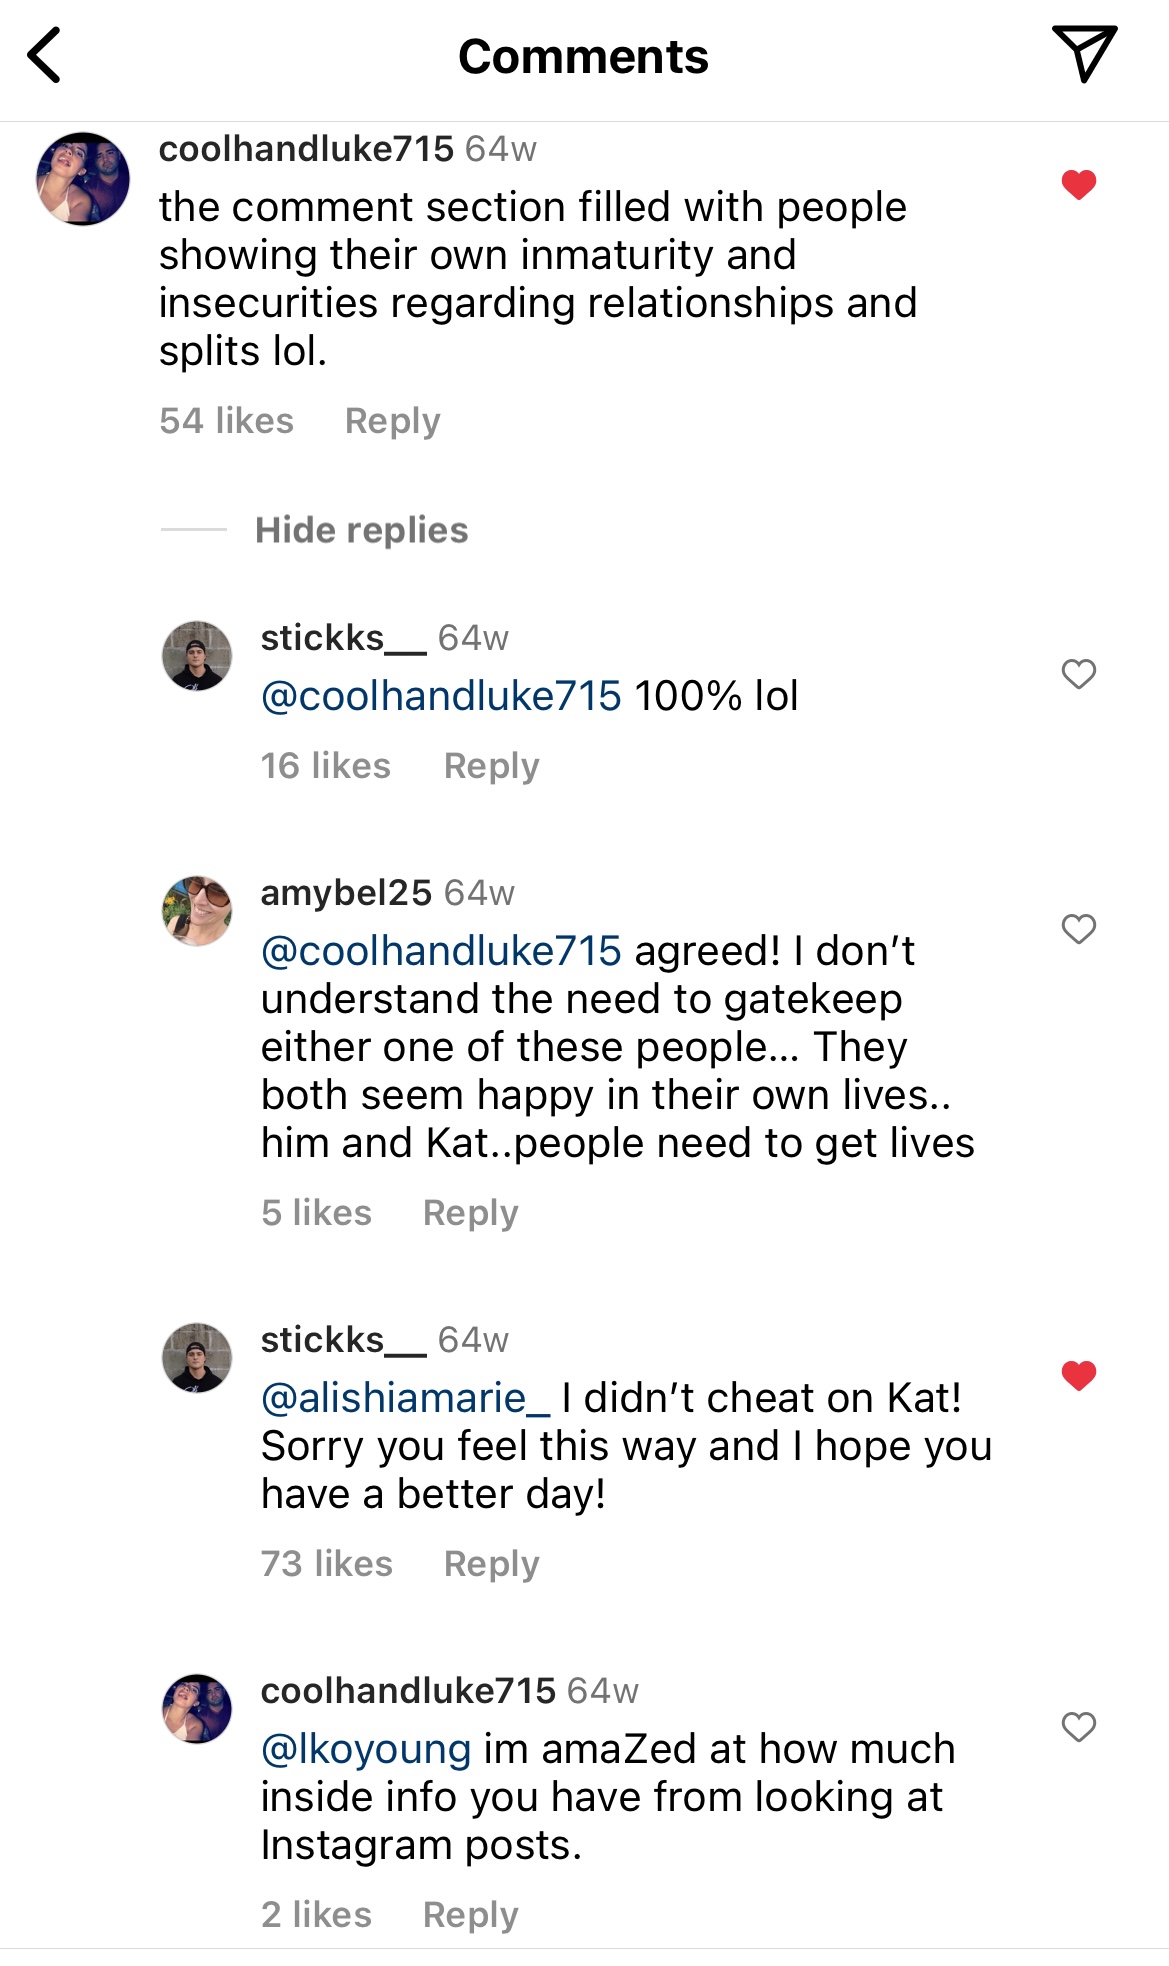 Mike Stickler responding to claims of cheating on Kat Stickler. 